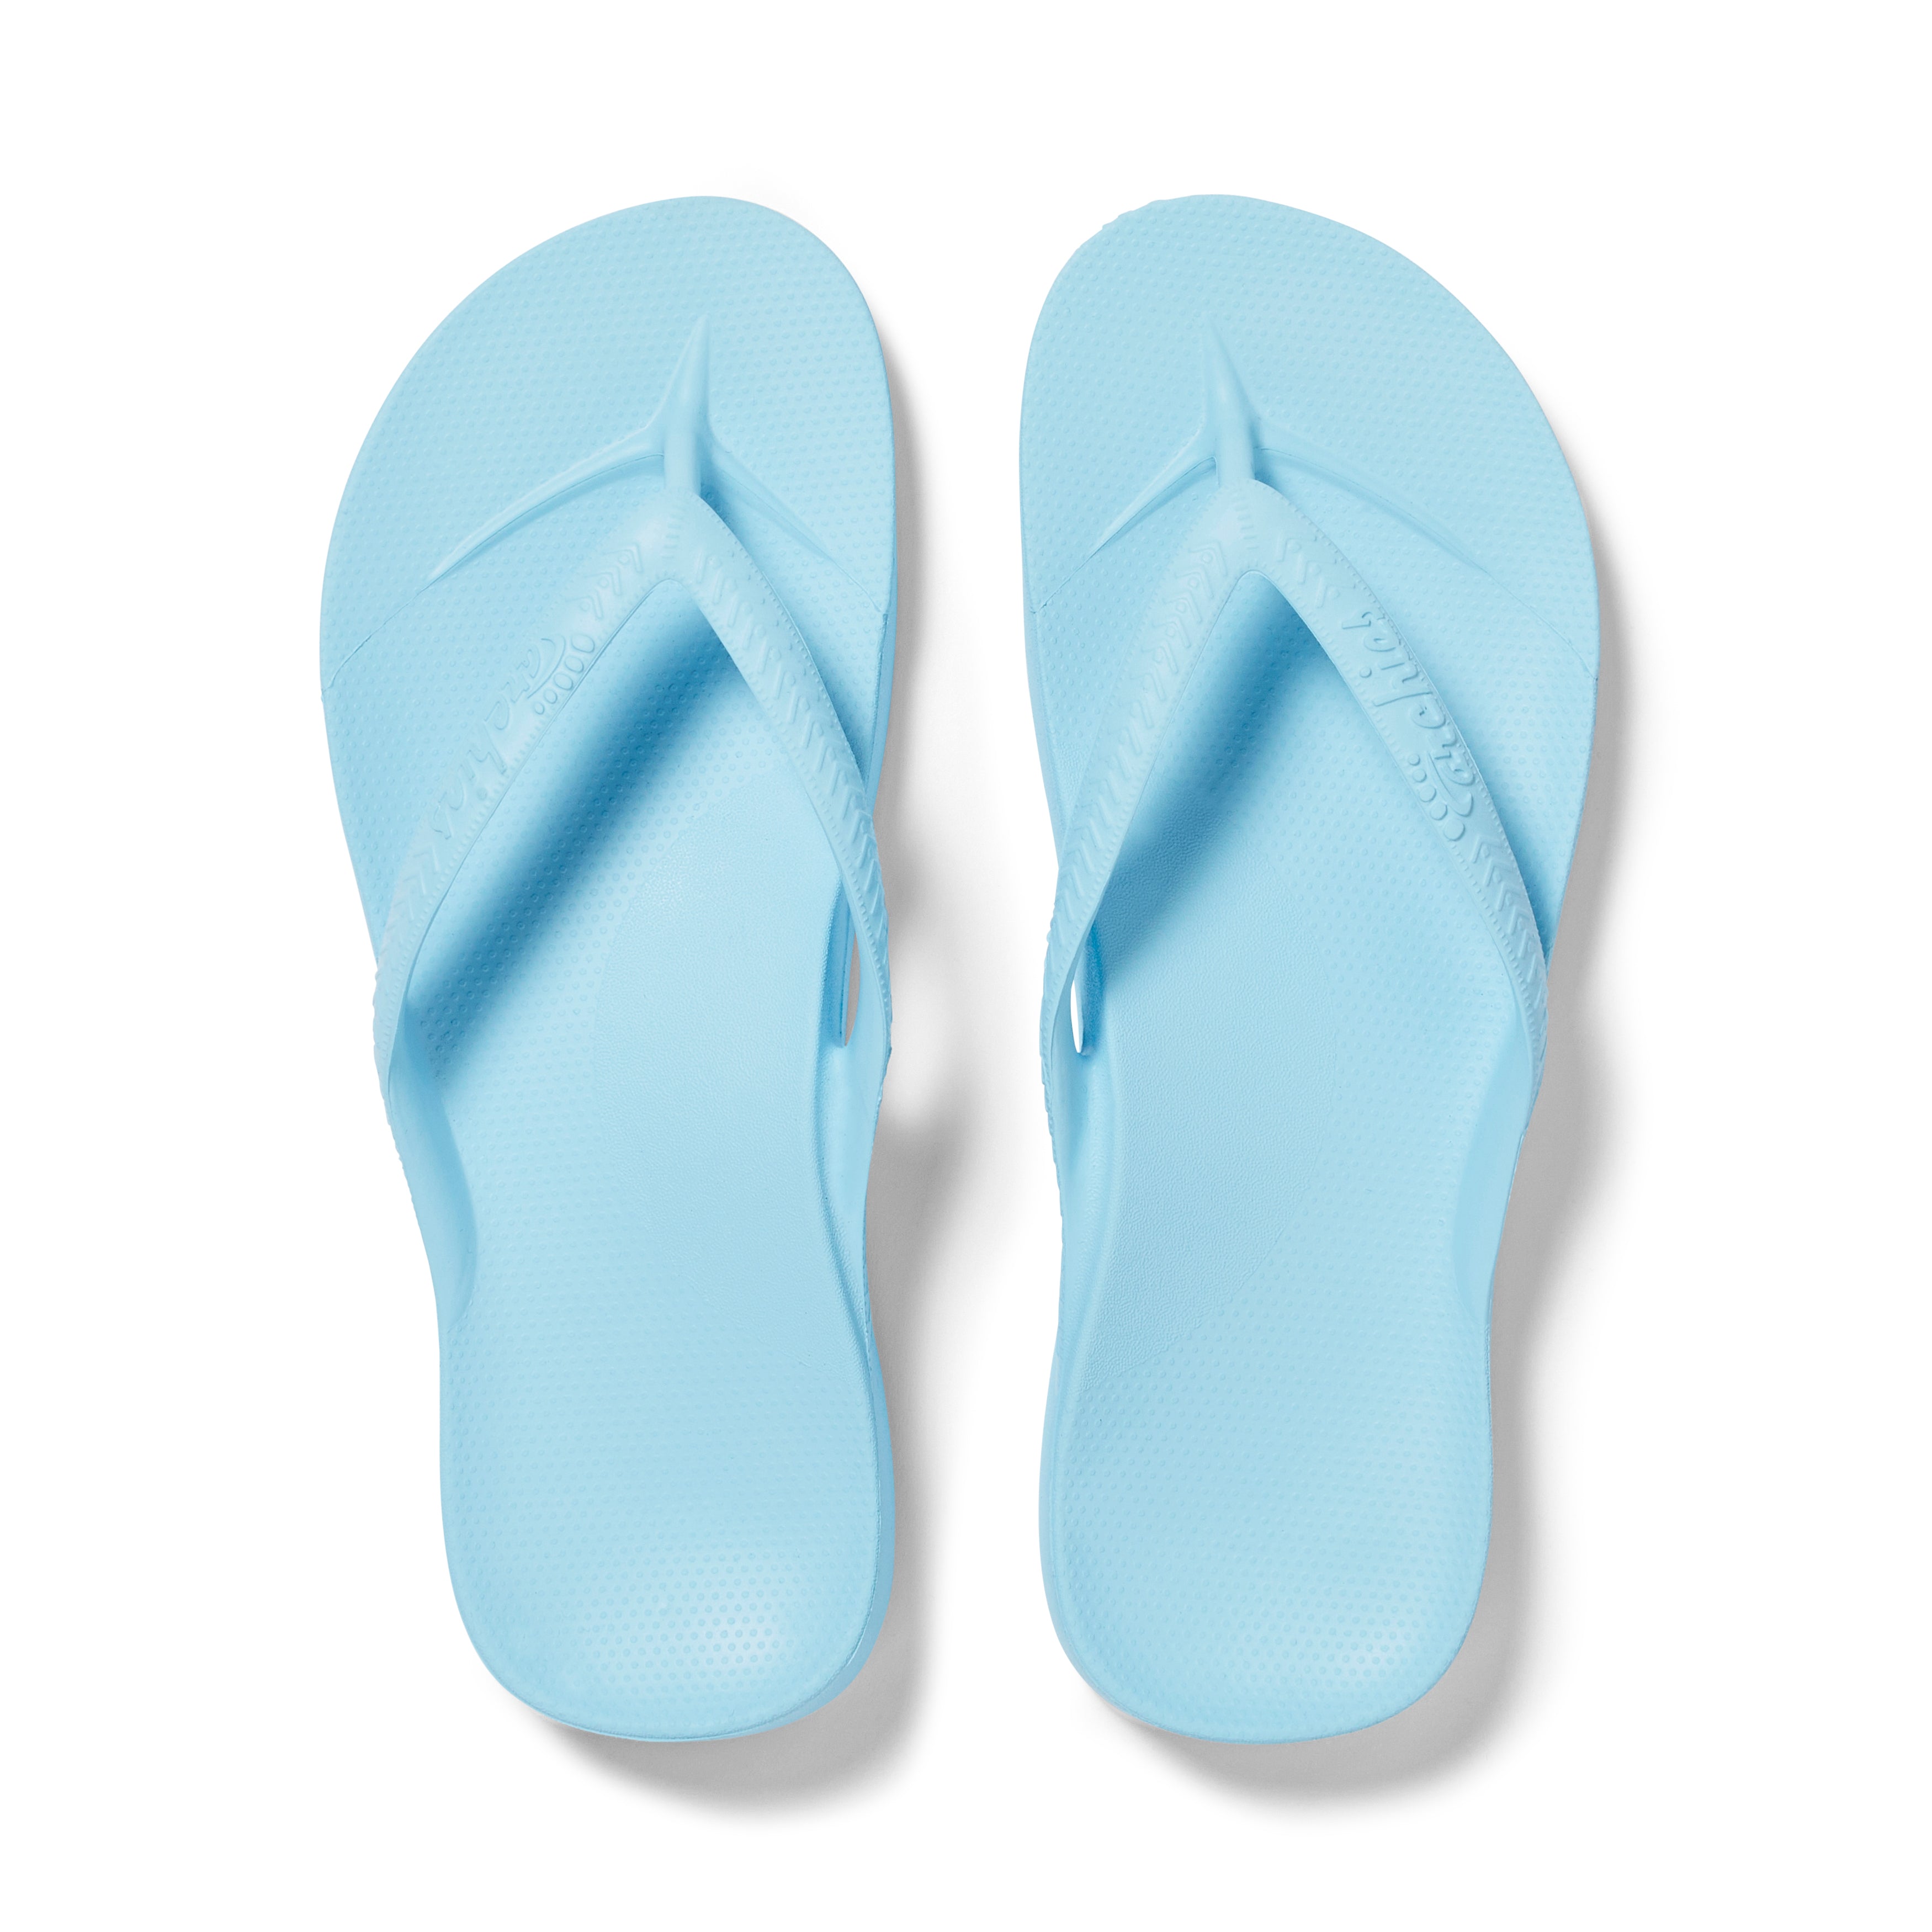 Archies Thongs - Adults - arch support thongs - CSTC Myotherapy